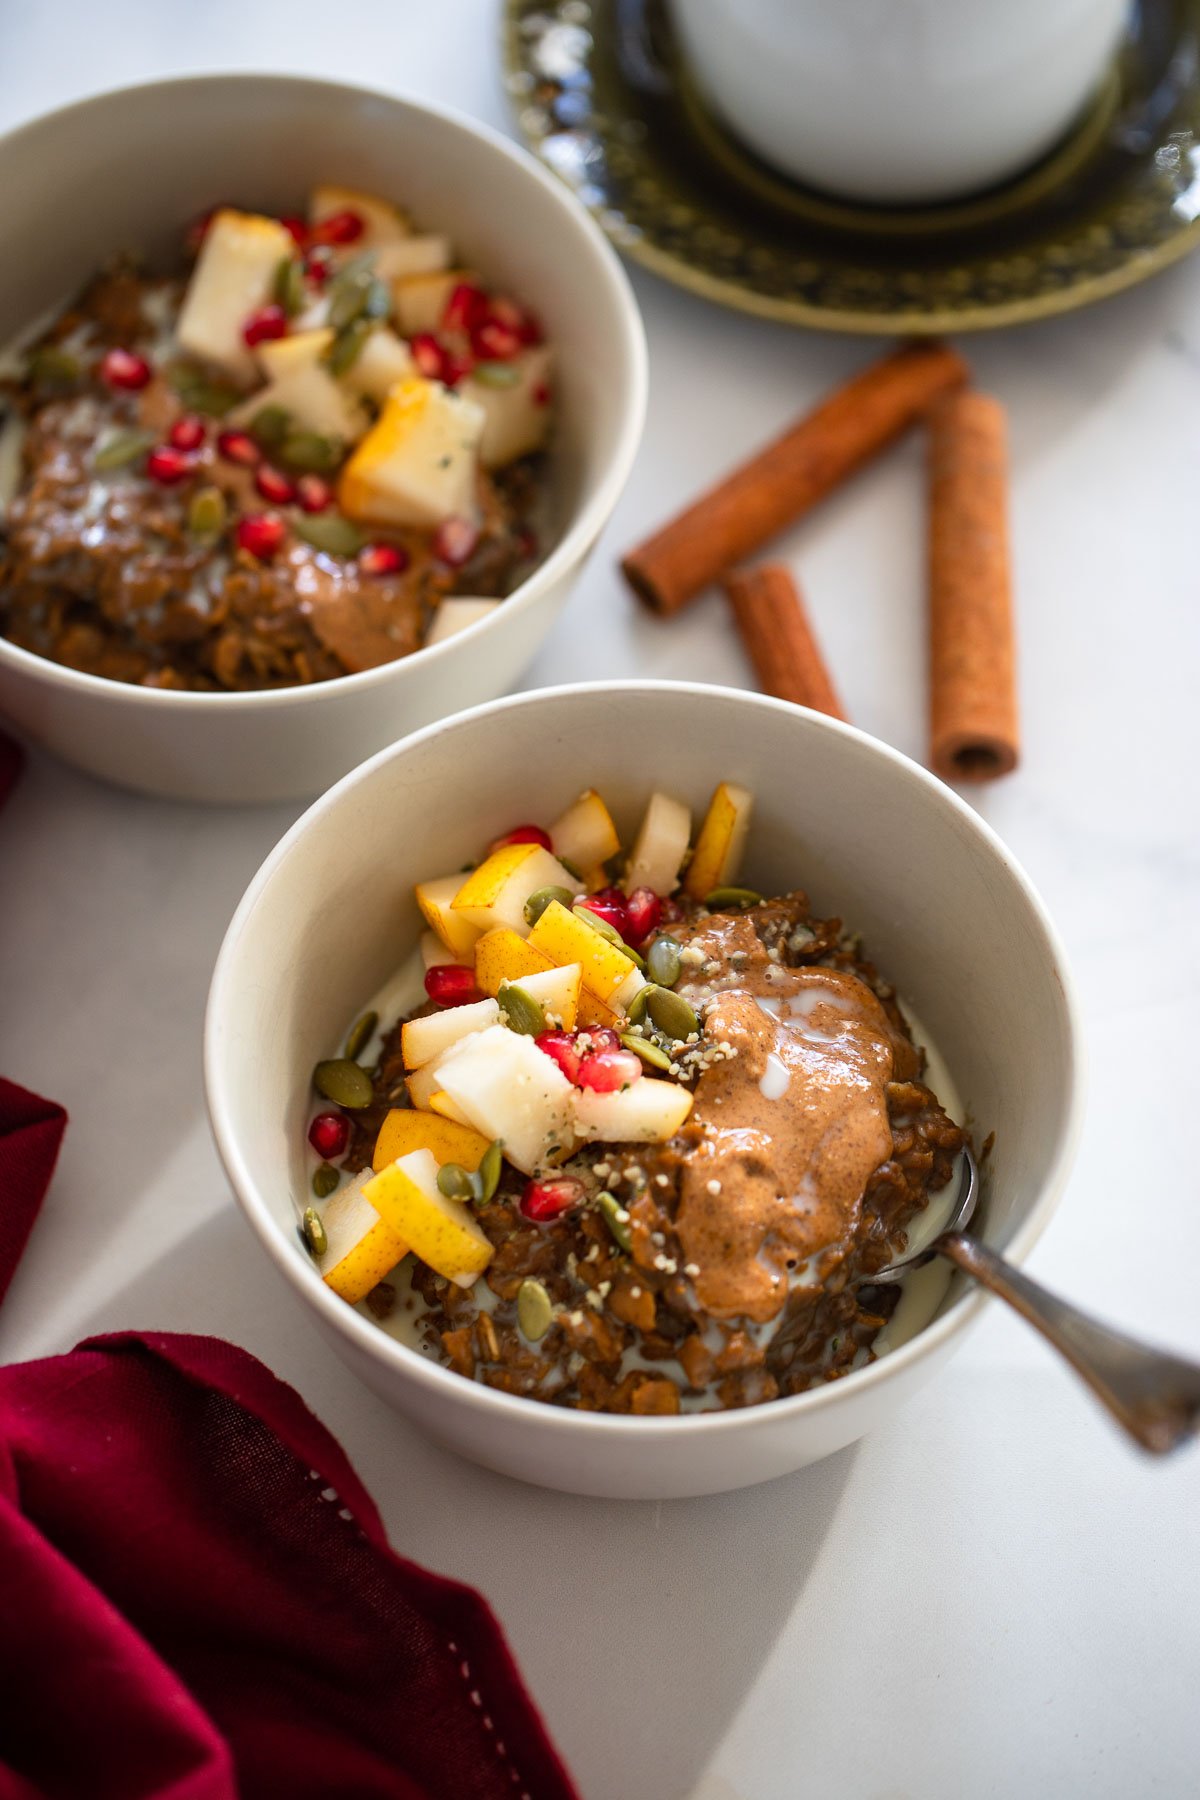 Oatmeal gingerbread topped with melted almond butter, chopped pears and pomegranate.